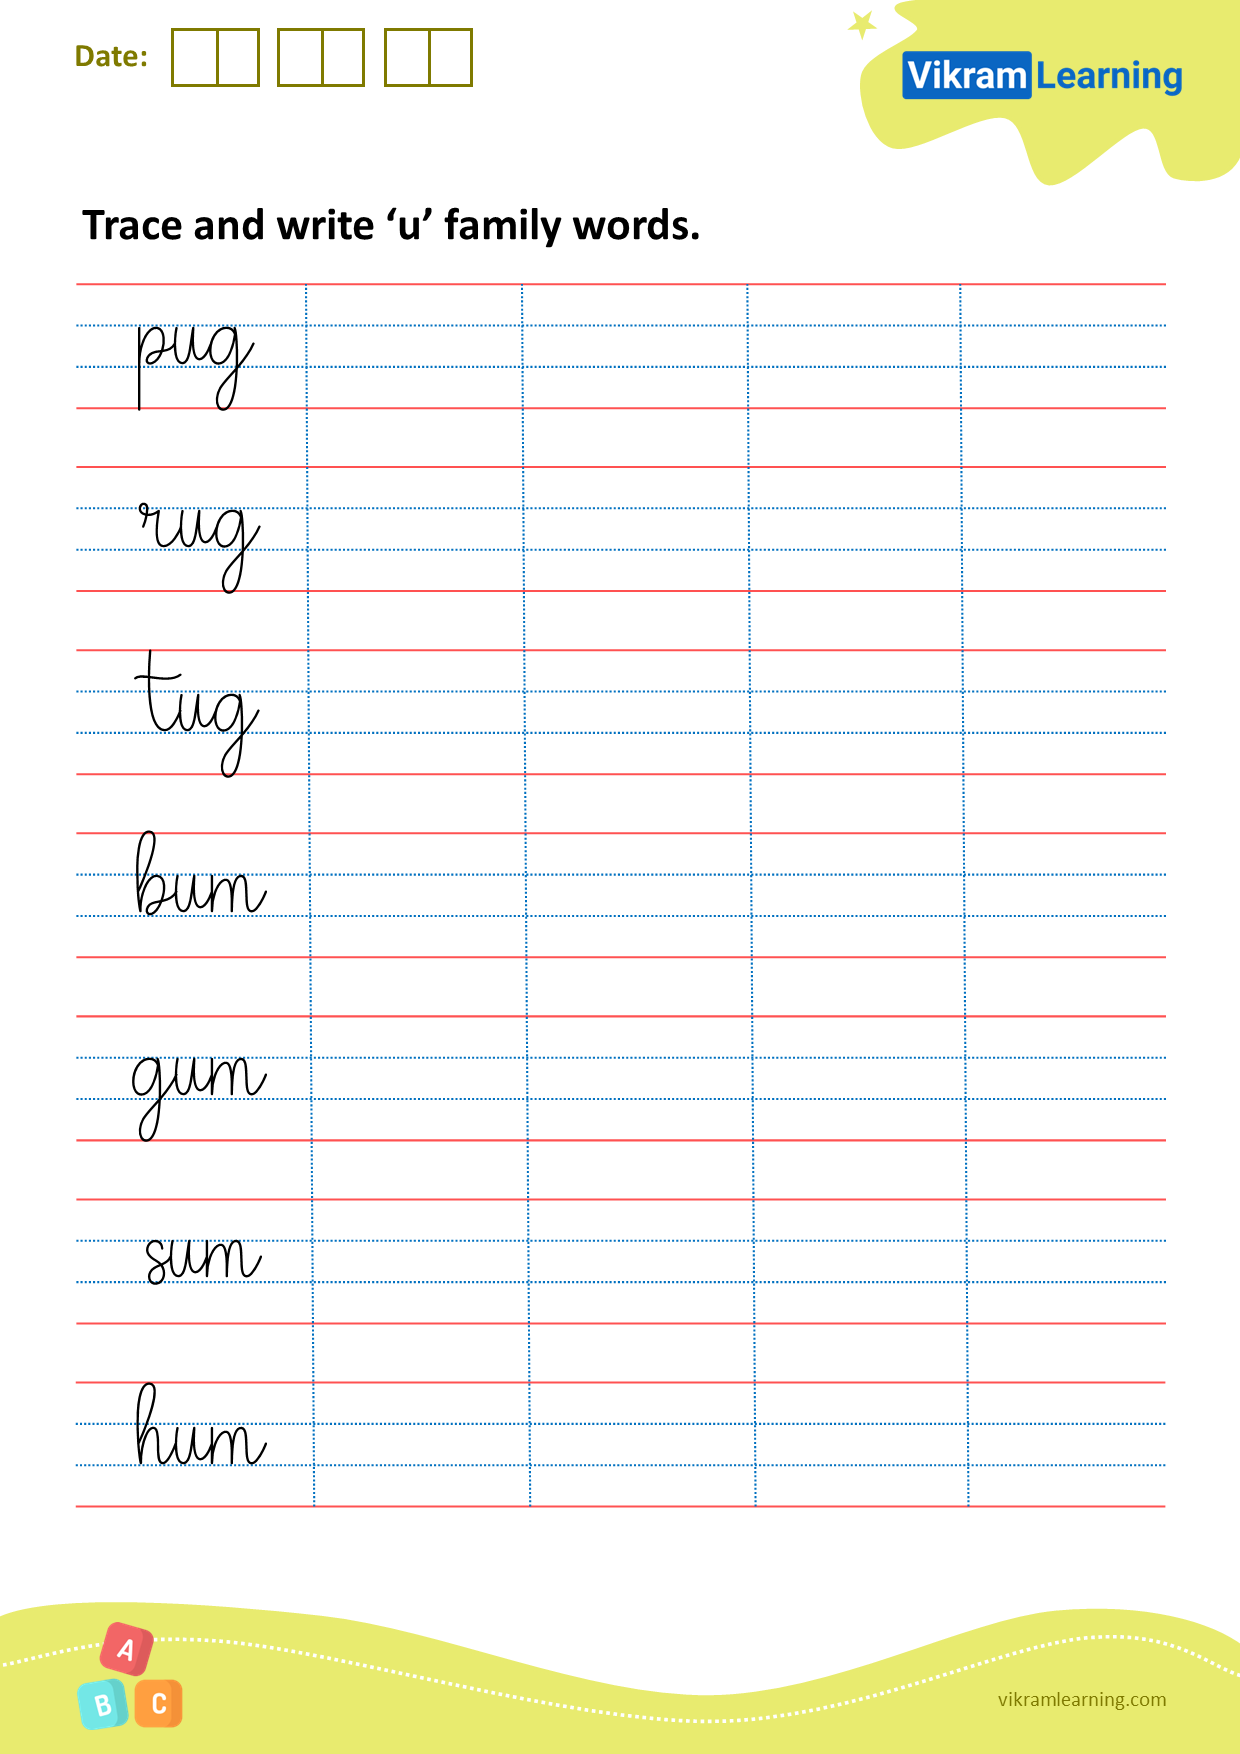 Download trace and write ‘u’ family words worksheets